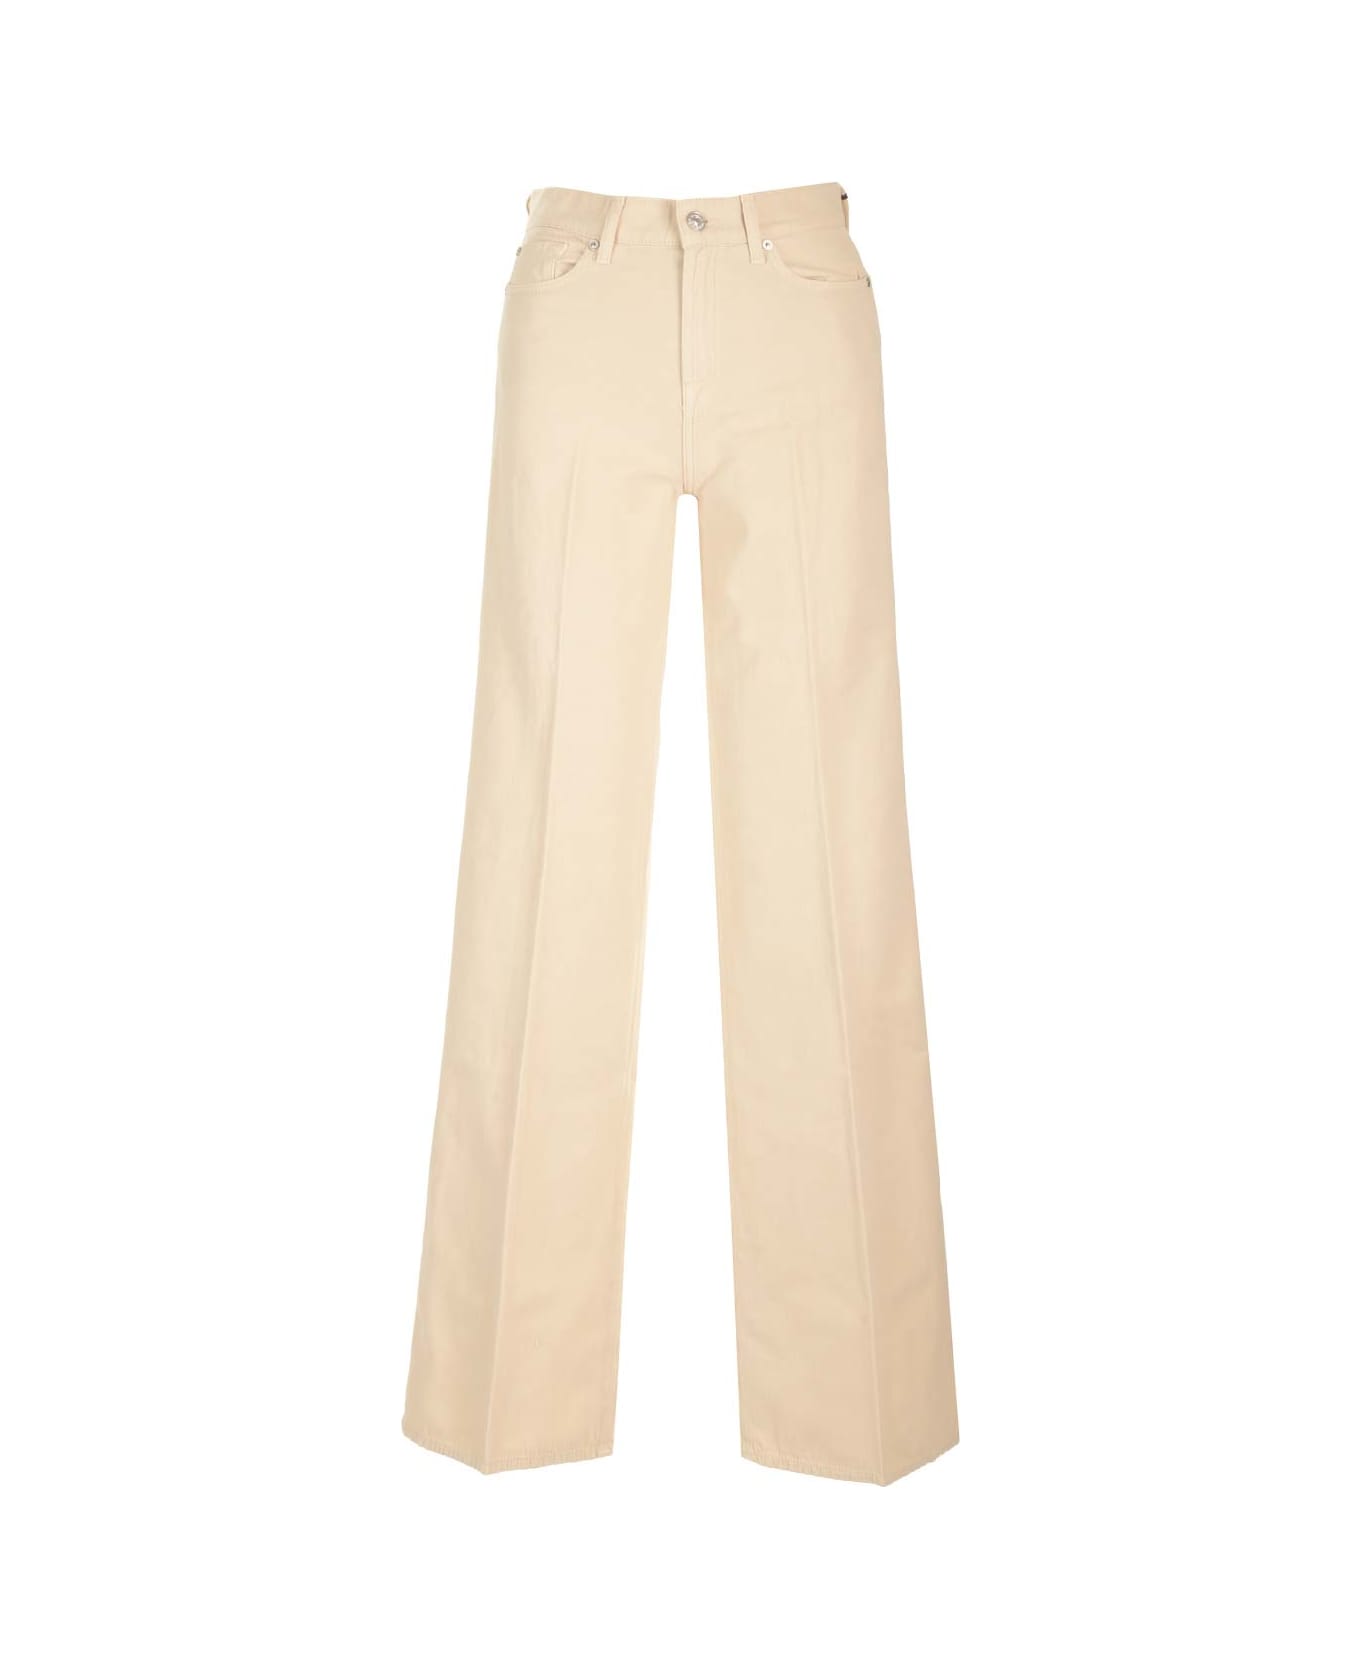 7 For All Mankind Straight Leg Trousers - White ボトムス